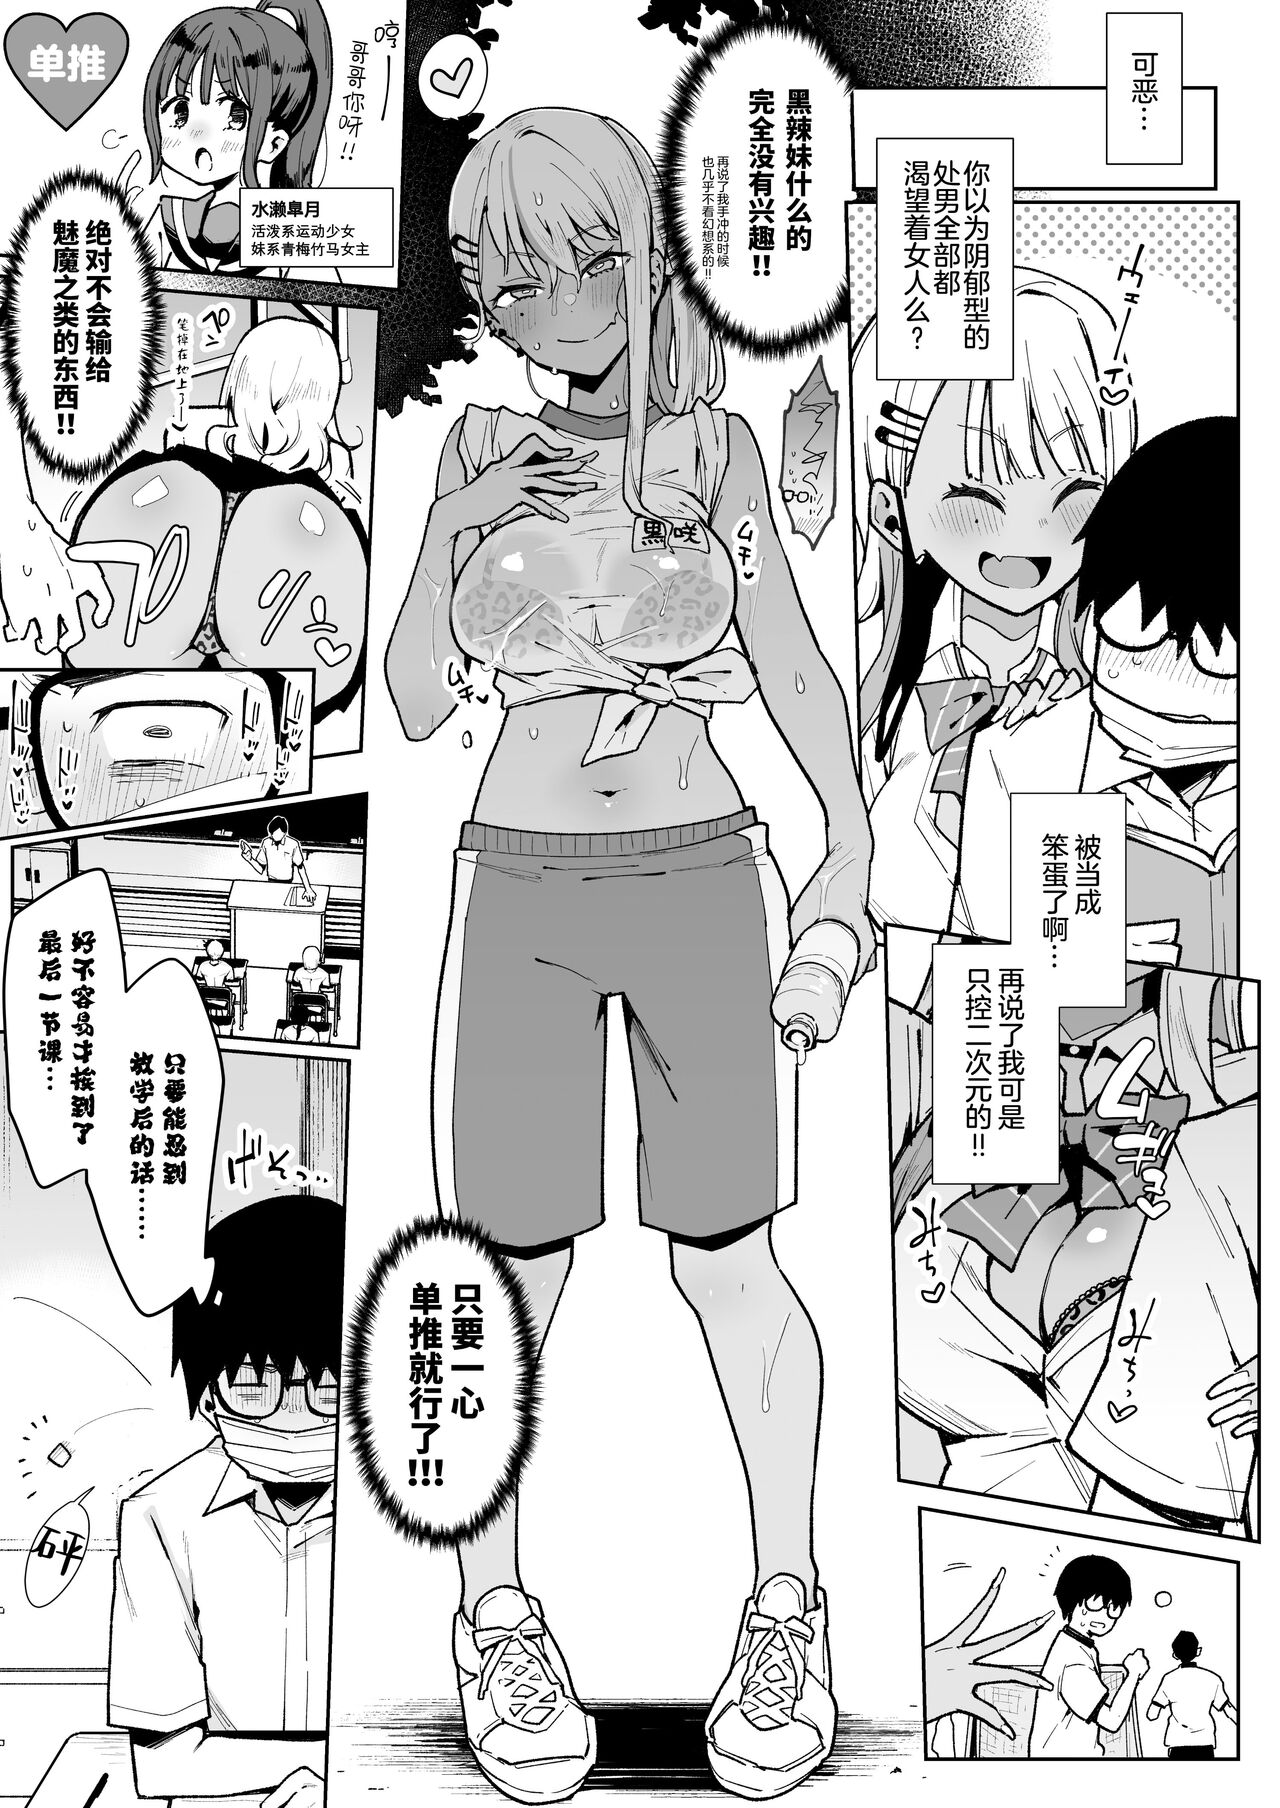 [Inbou no Teikoku (Indo Curry)] Otaku-kun ... Do you think you can beat the succubus even though you're a yin yang? (コミティア137) [陰謀の帝国 (印度カリー)] オタクくんさぁ…陰キャの癖にサキュバスに勝てると思ってンの？ [绅士仓库汉化] [DL版]